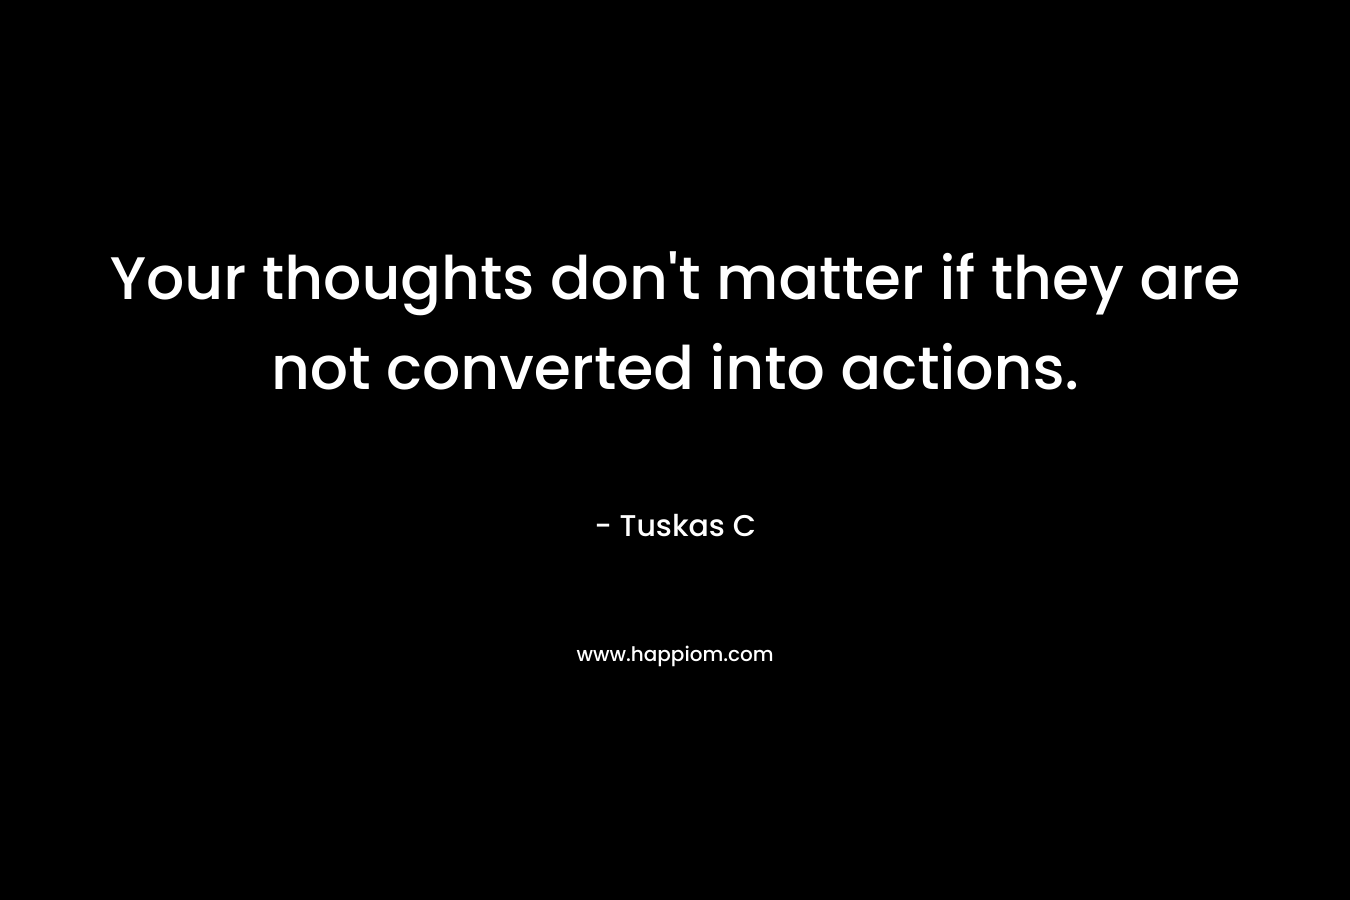 Your thoughts don’t matter if they are not converted into actions. – Tuskas C